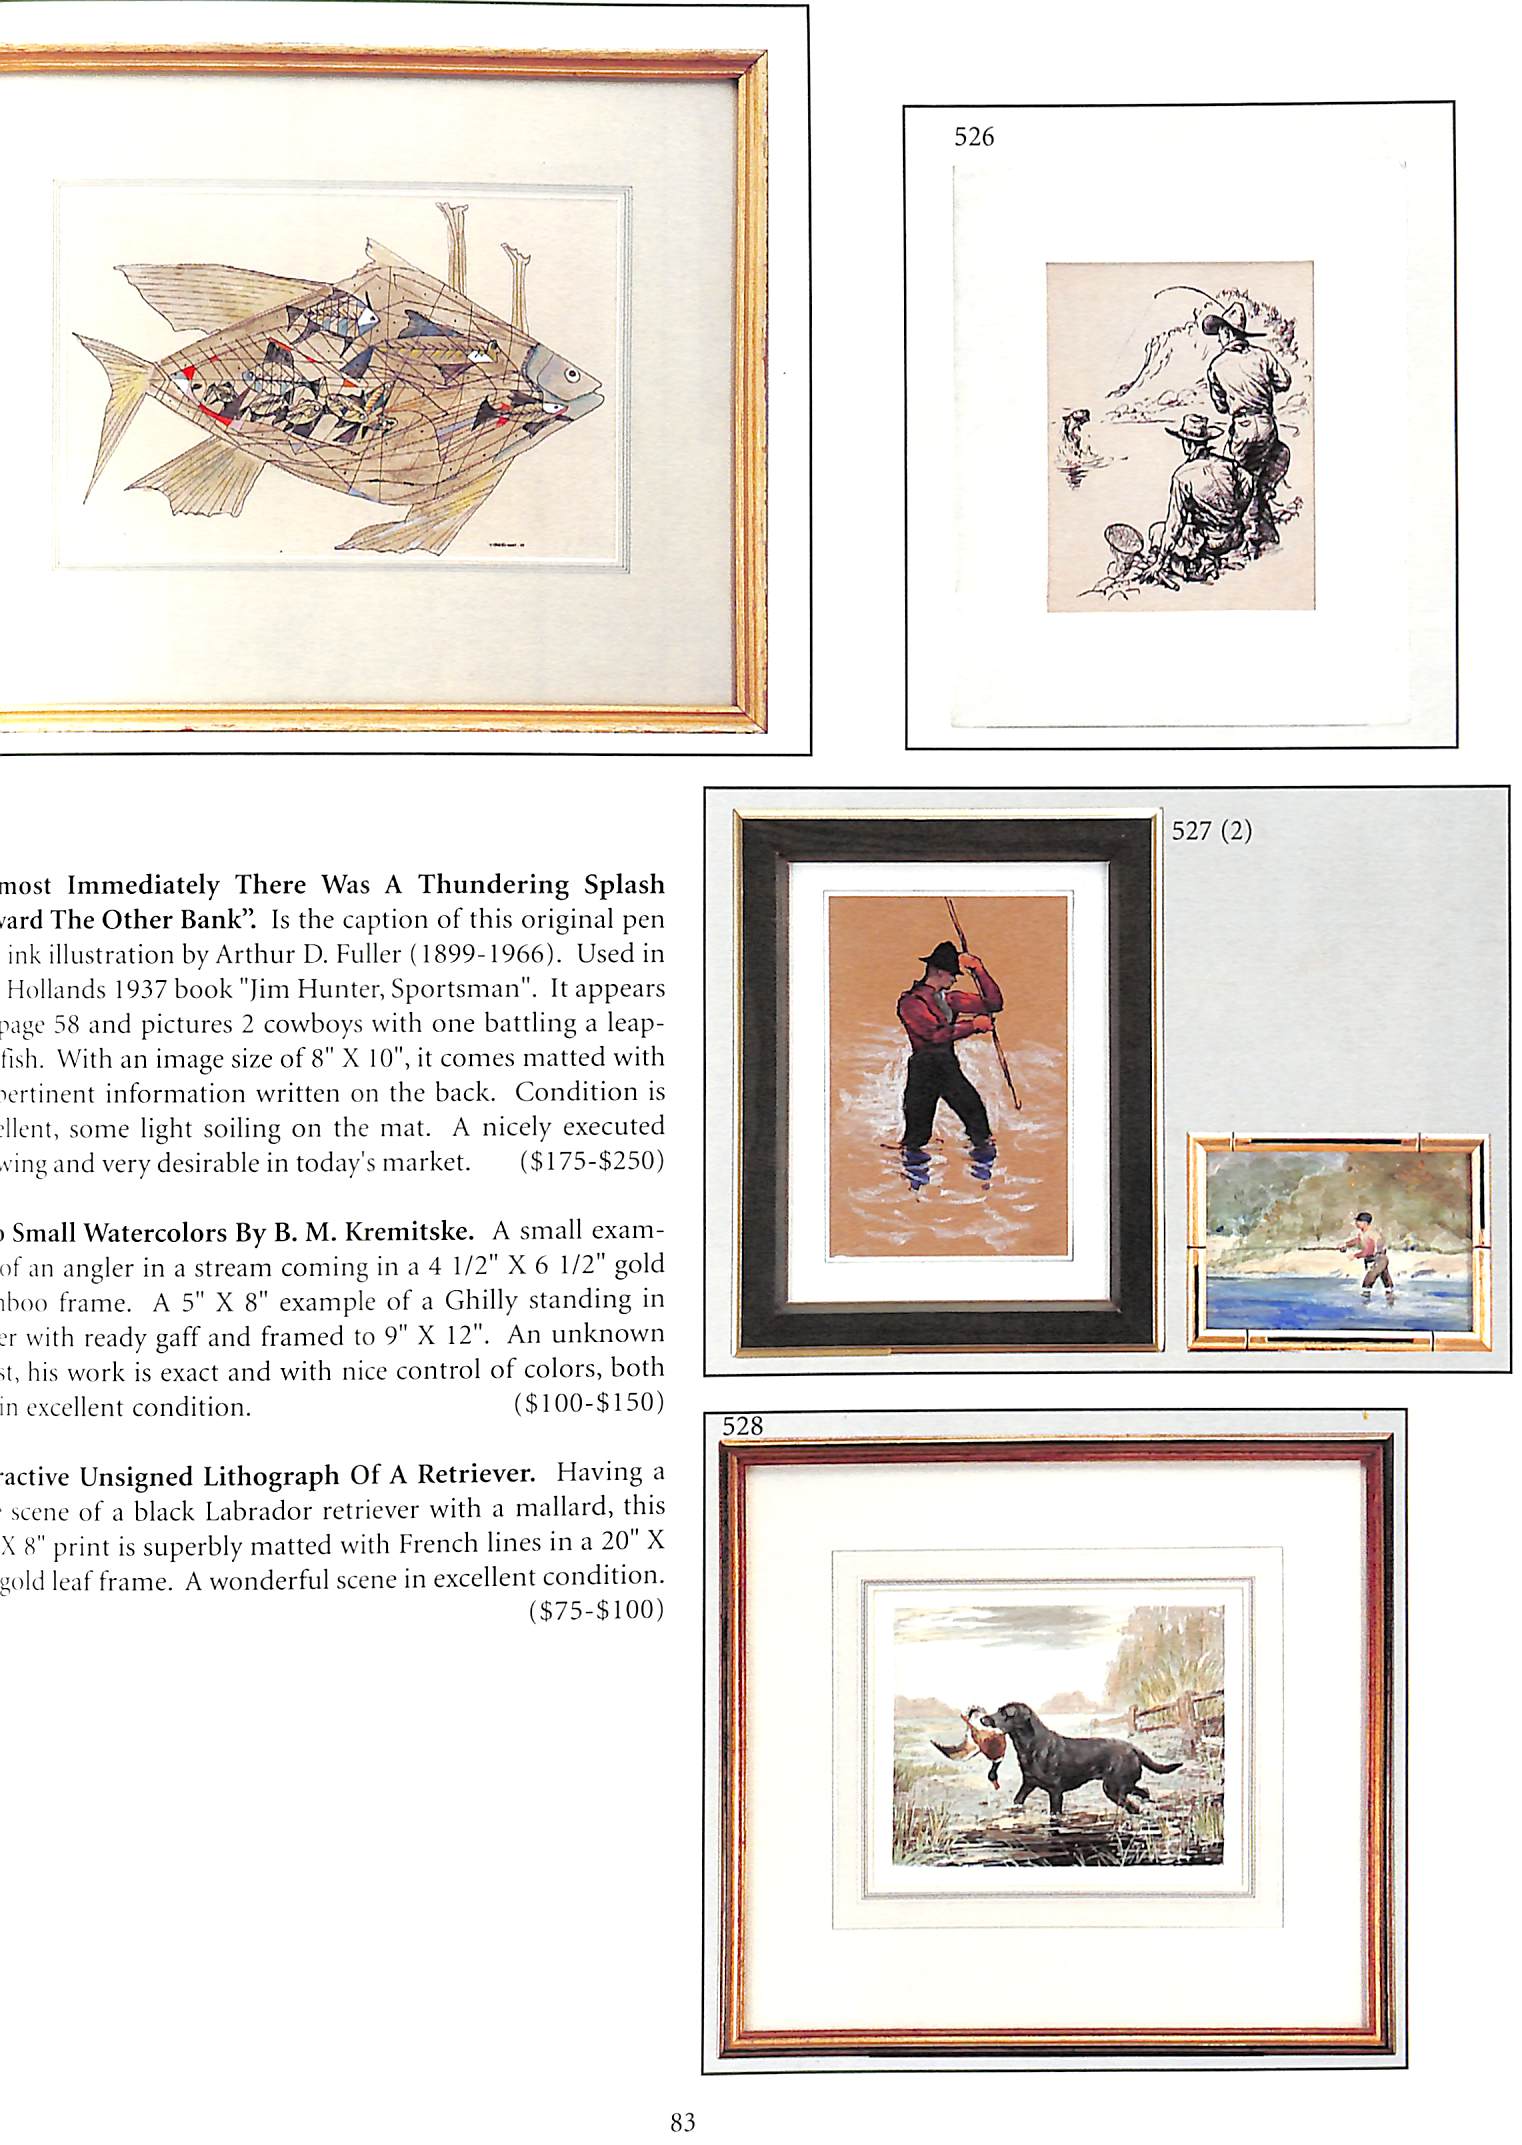 Lang's Sporting Collectables: America's Leading Fishing Tackle Auctio